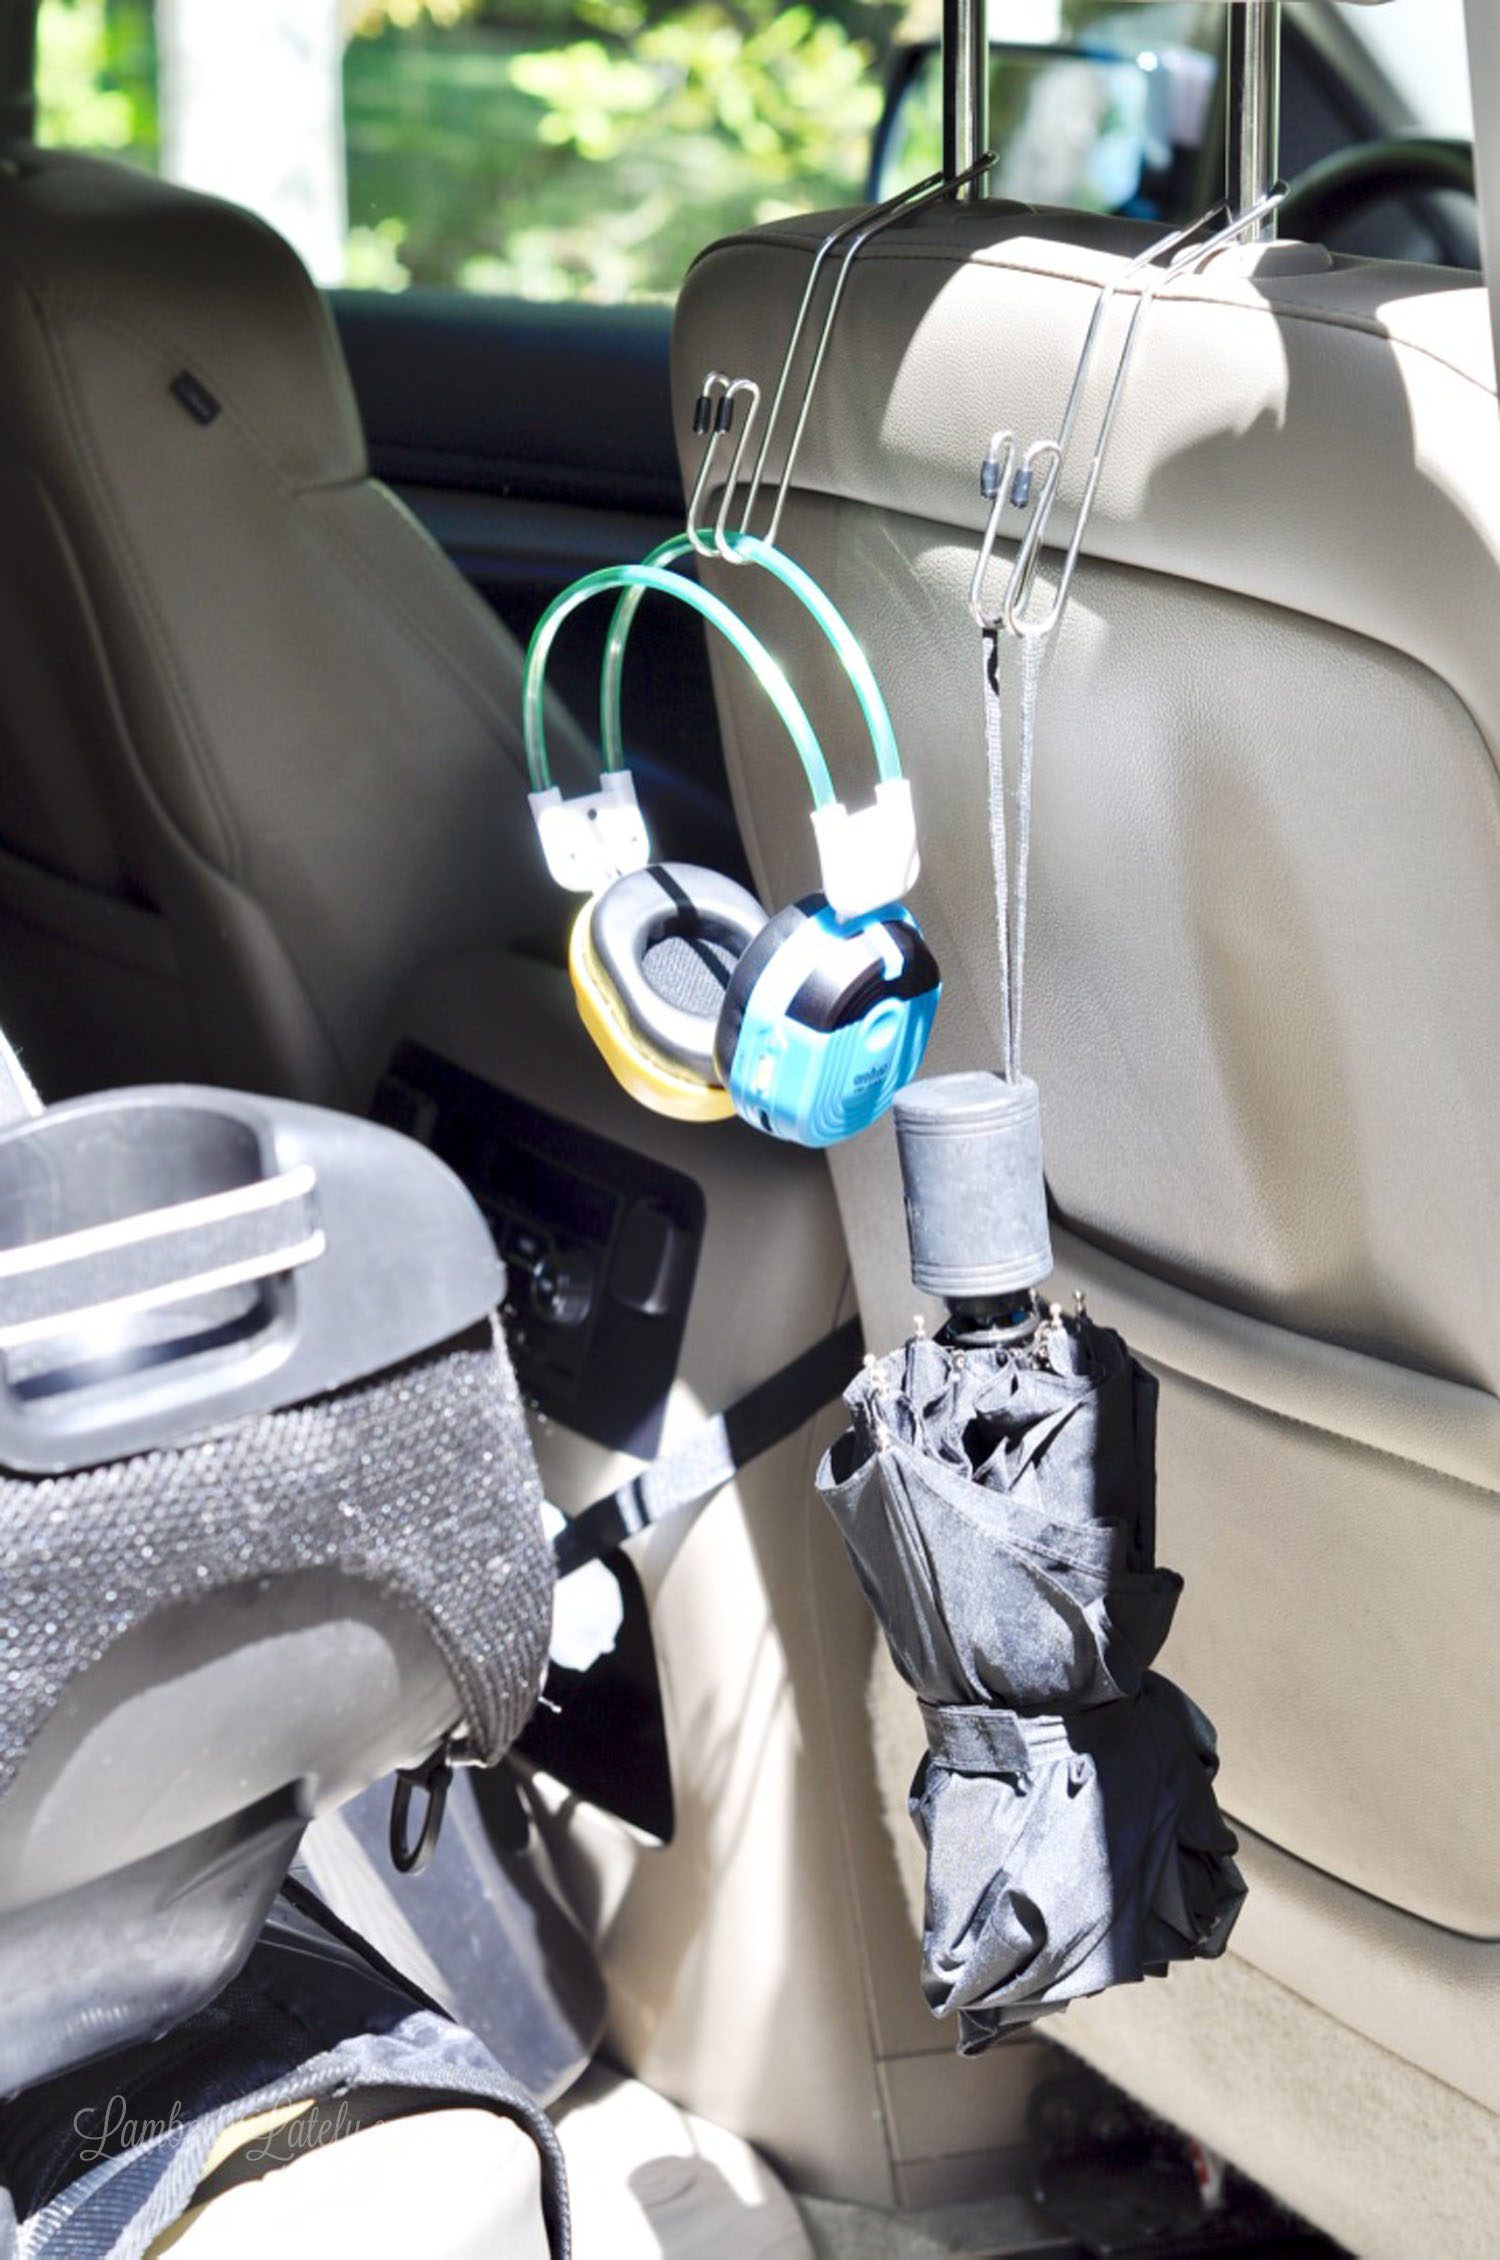 headphones and umbrella hanging on the back of a car seat with metal hangers.